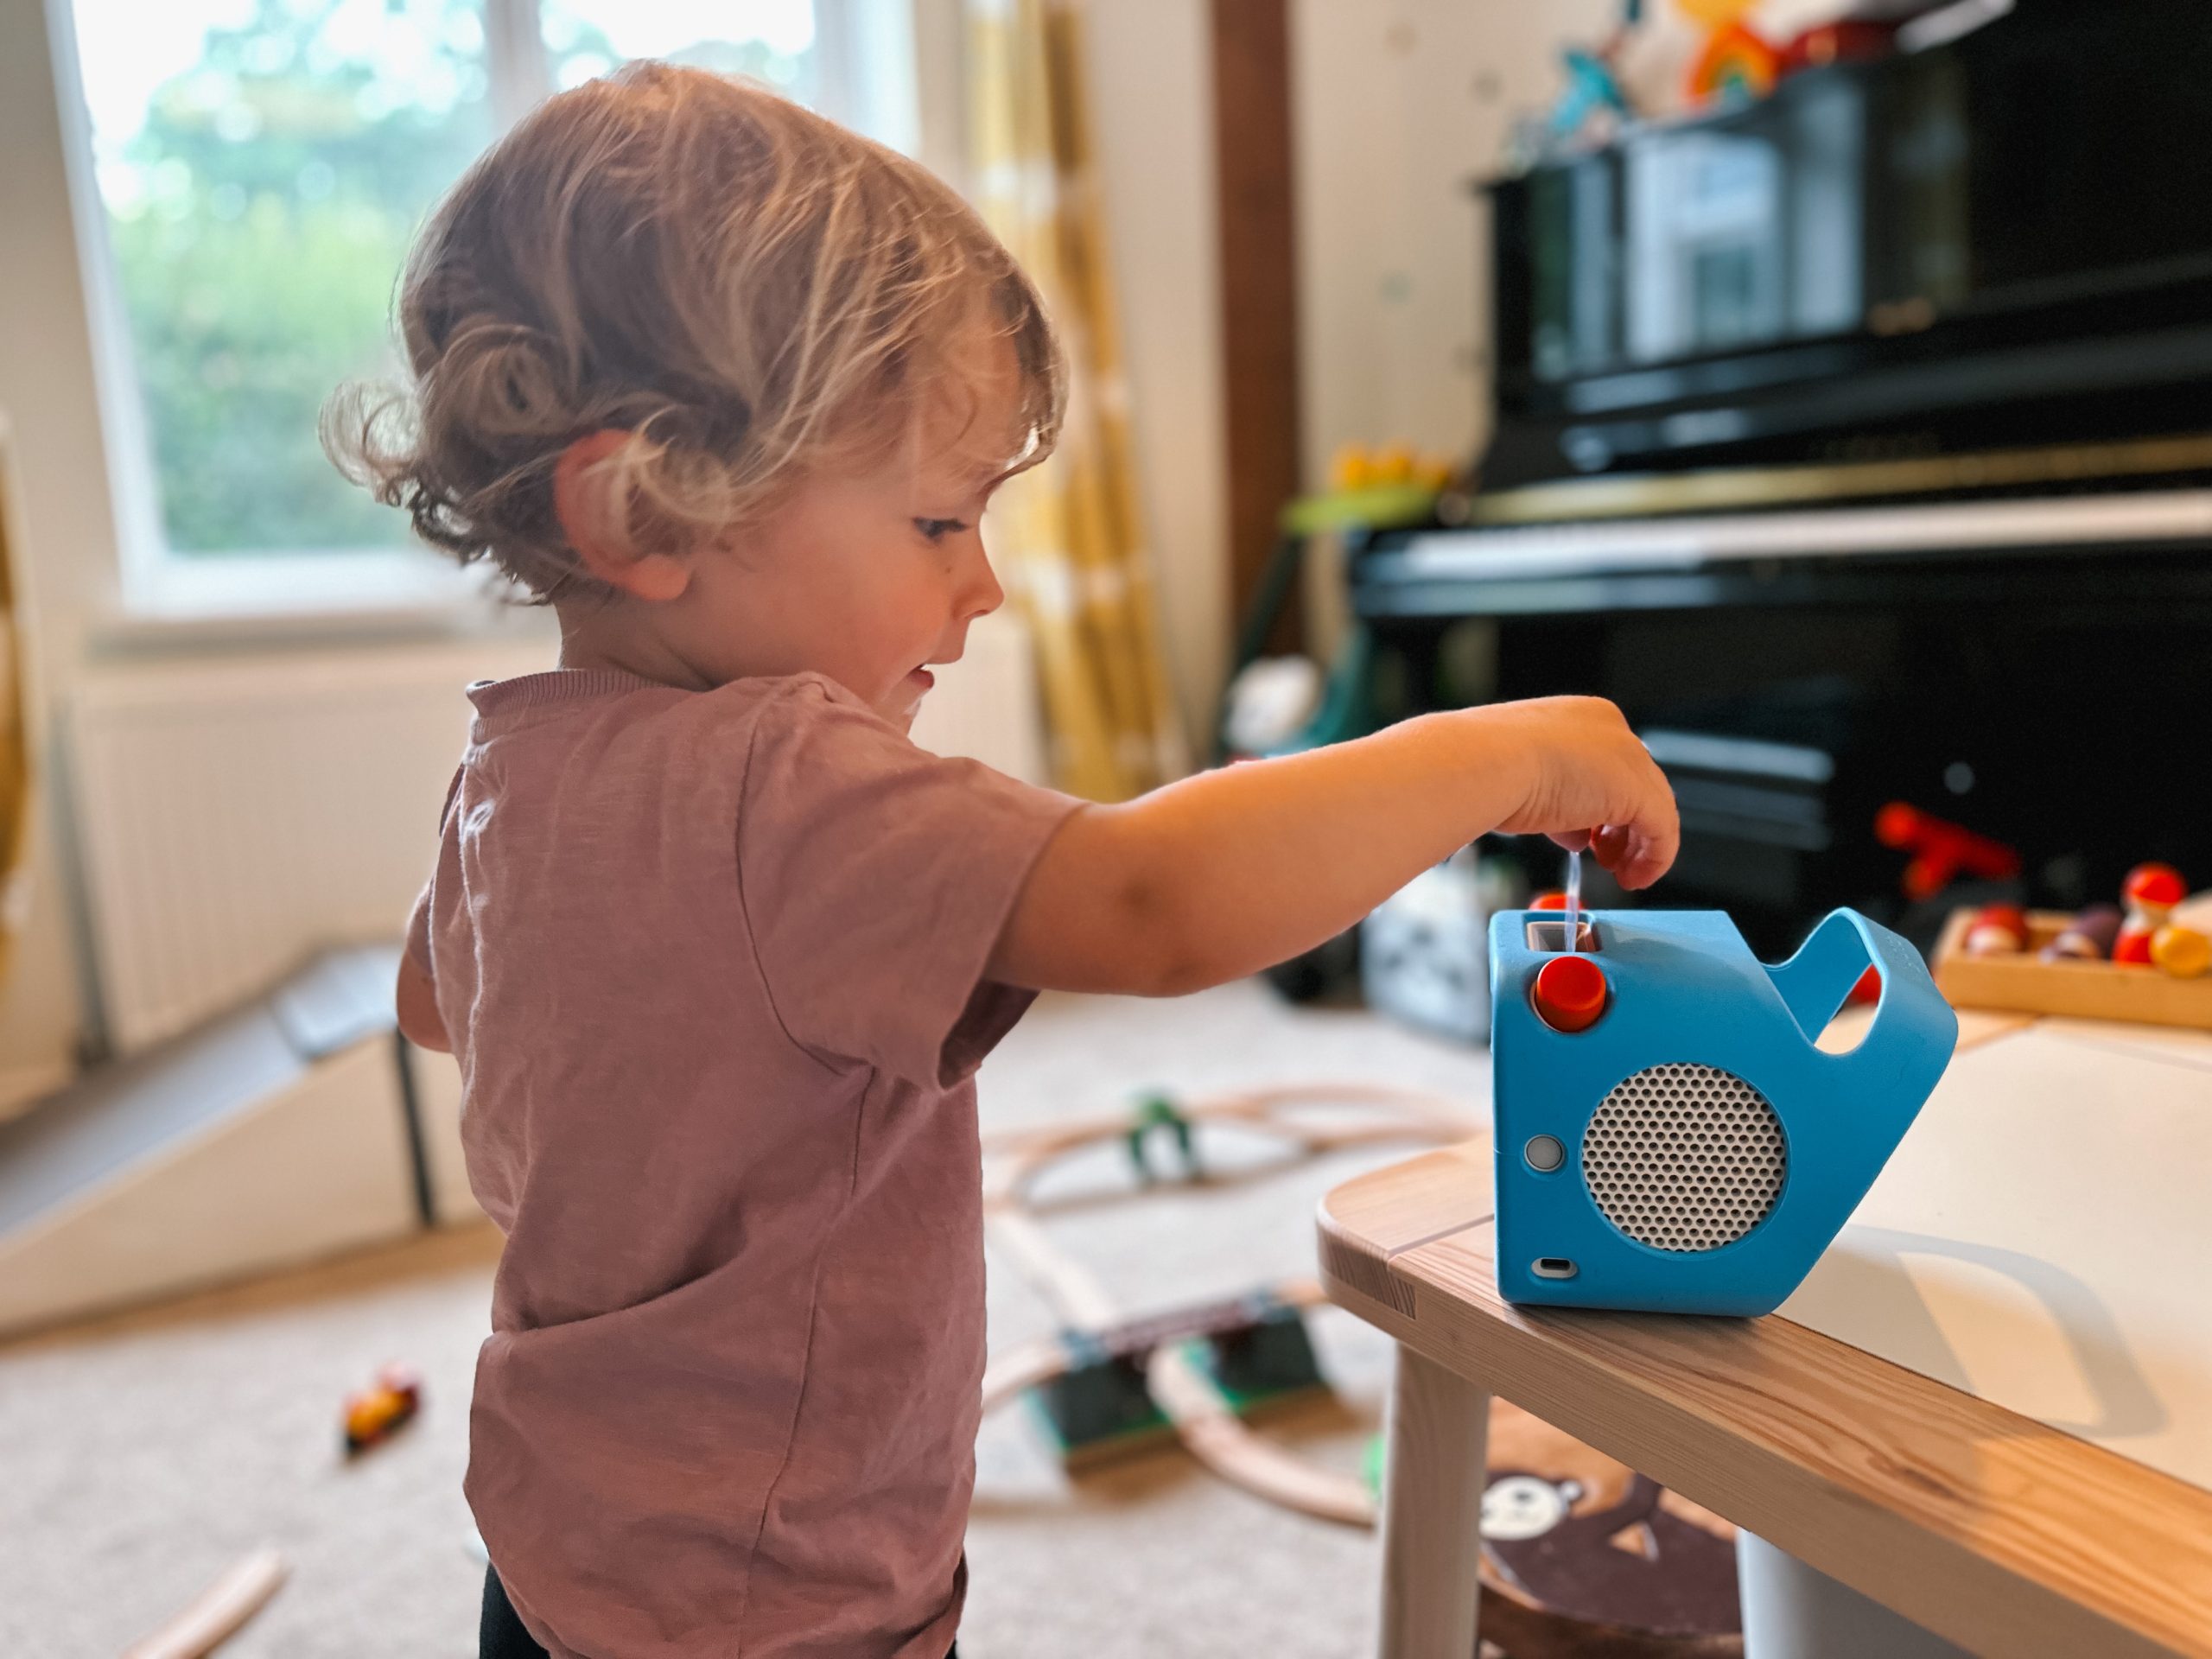 Yoto Player review - Innovative audio player for kids - Rhubarb and Wren